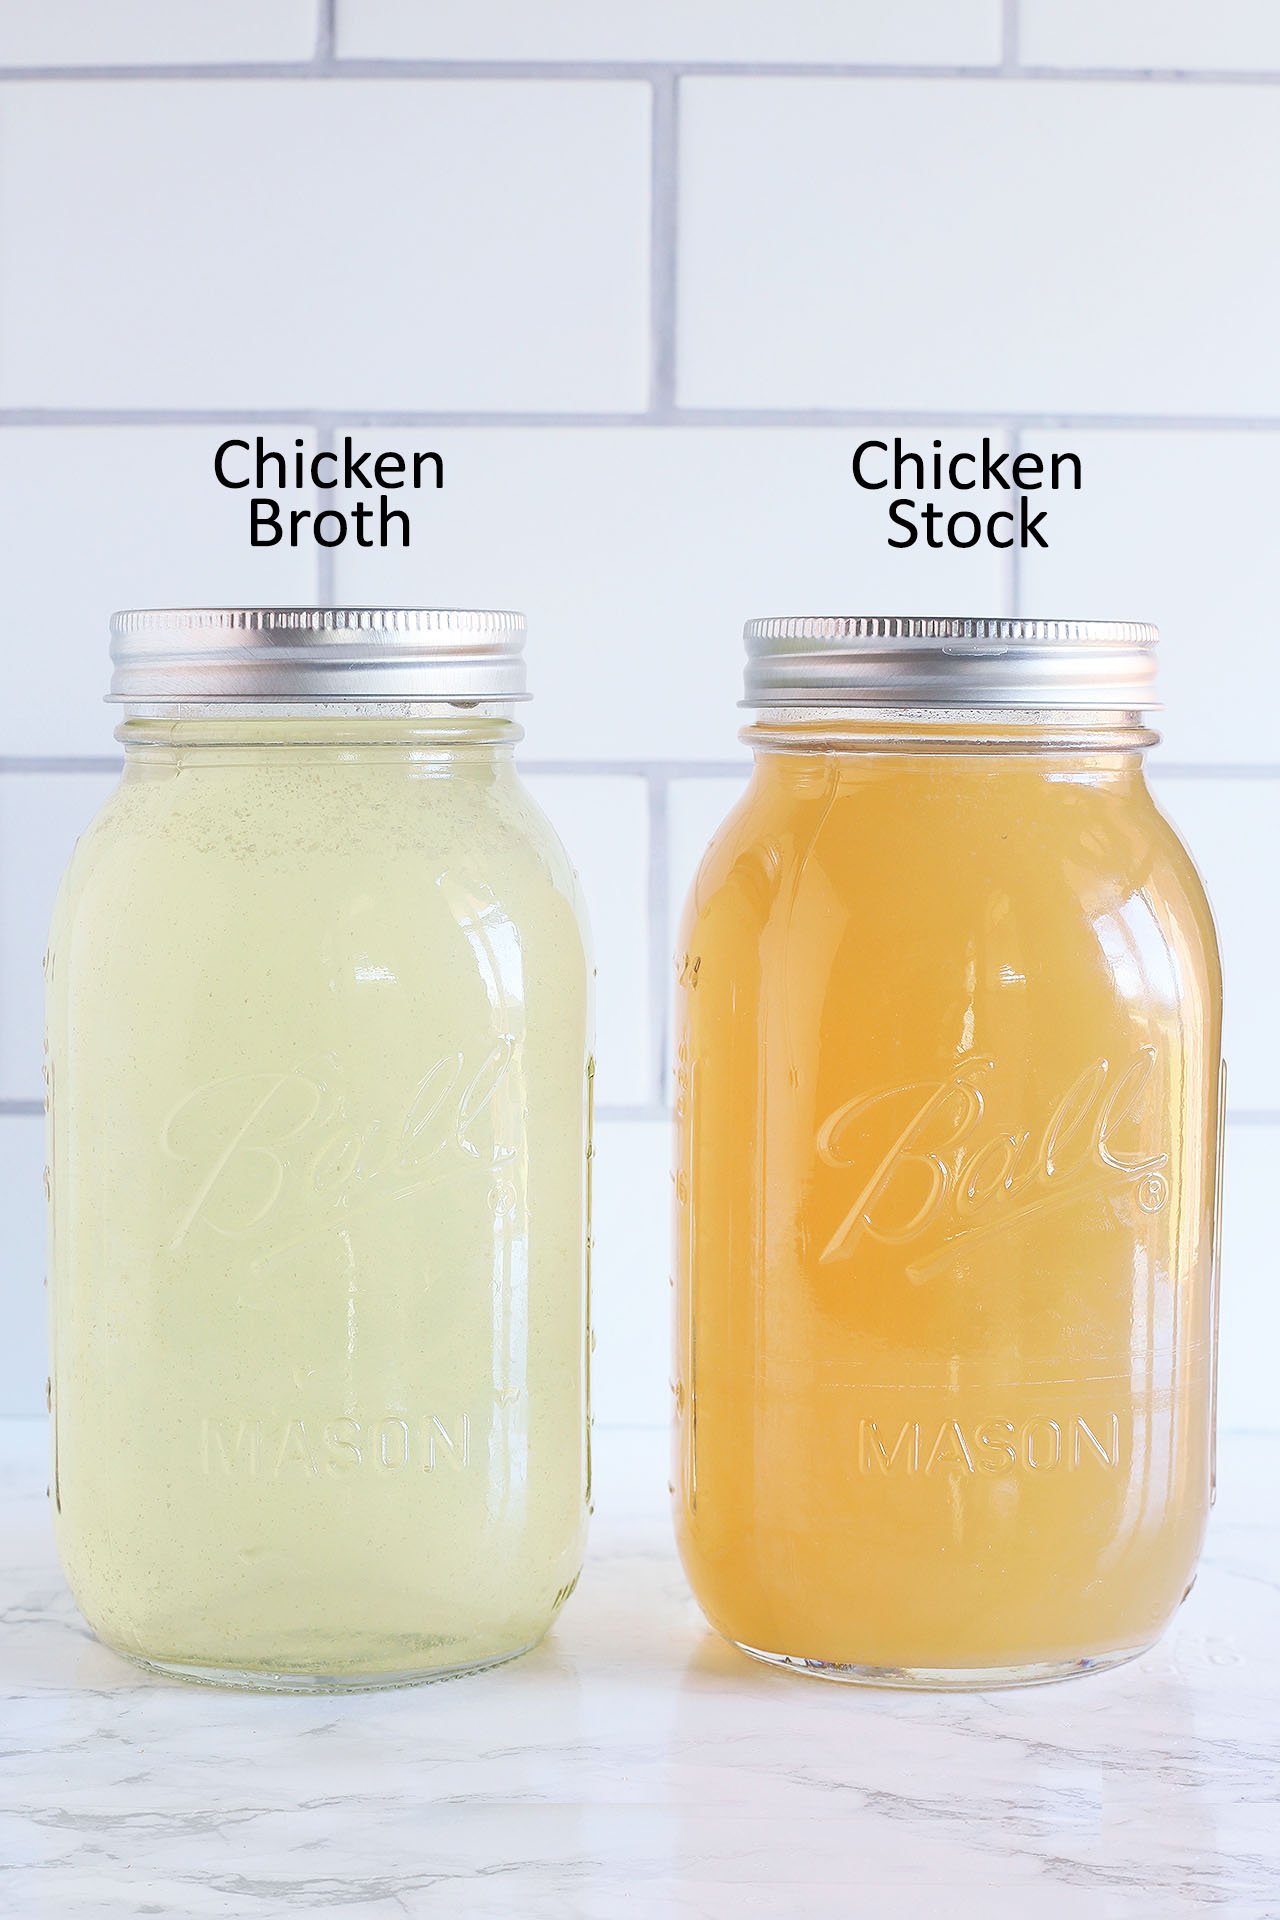 Side-by-side comparison of a jar of chicken broth and chicken stock. The jar of chicken broth is pale yellow. The jar of chicken stock is dark yellow.